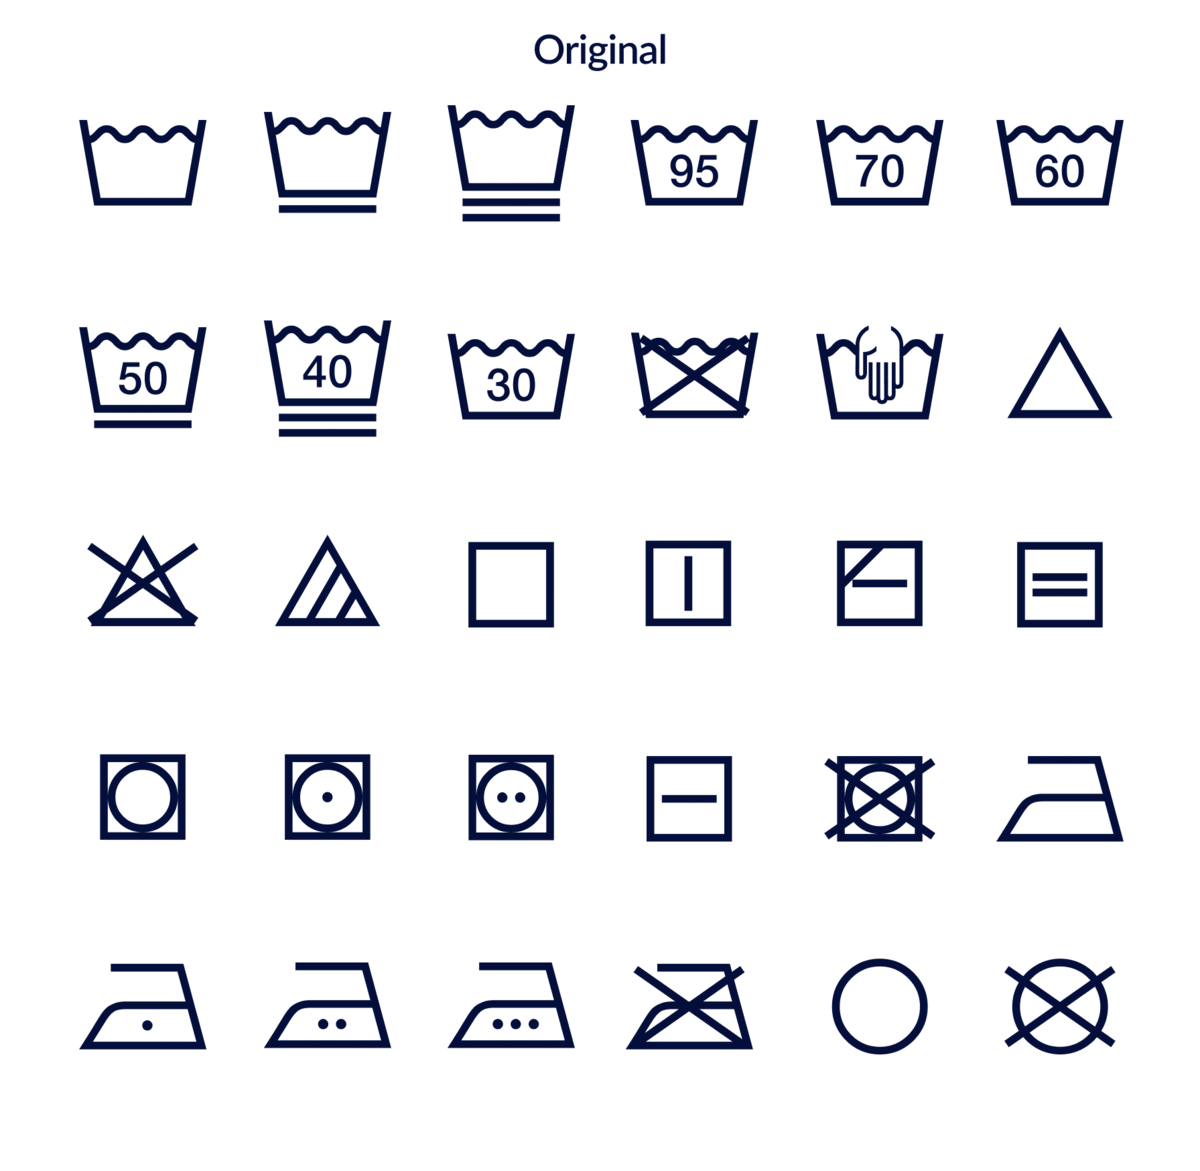 Redesigned laundry symbols/icons with a focus on users and usability